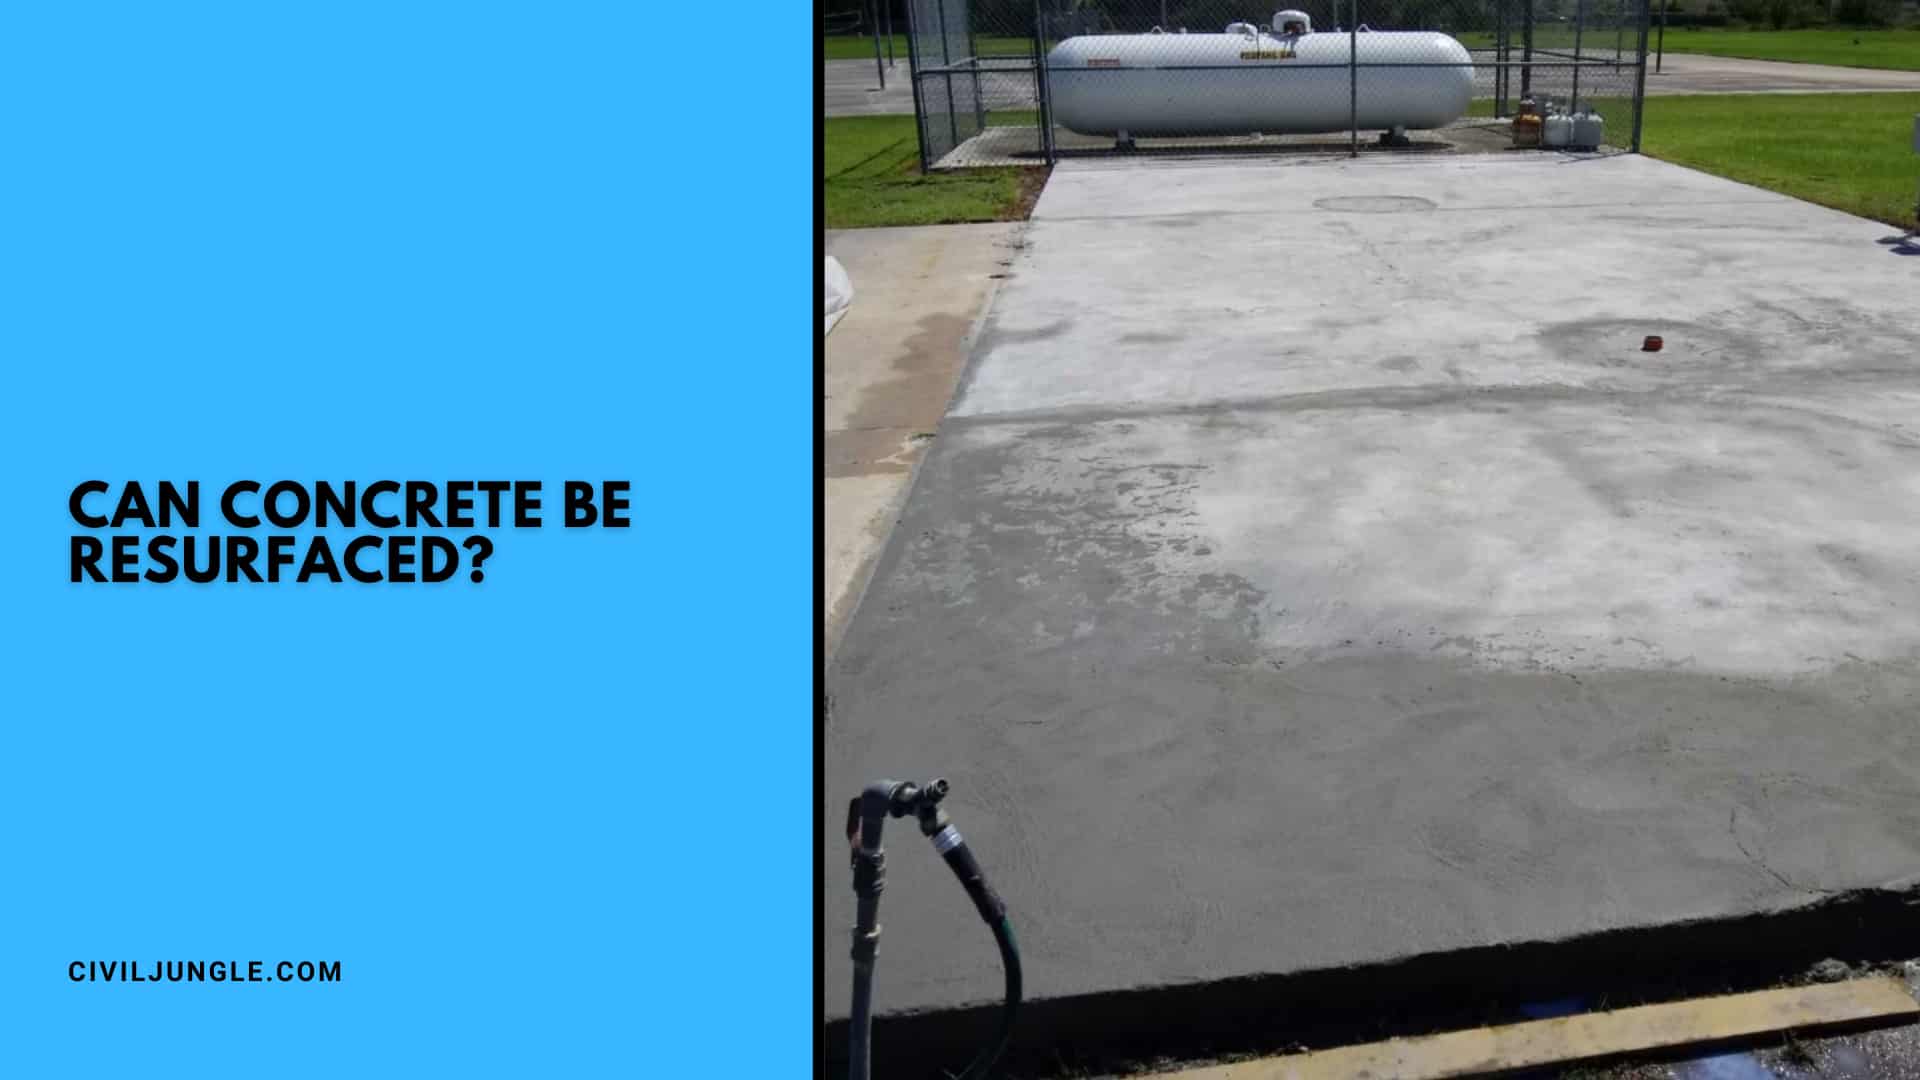 Can Concrete Be Resurfaced?